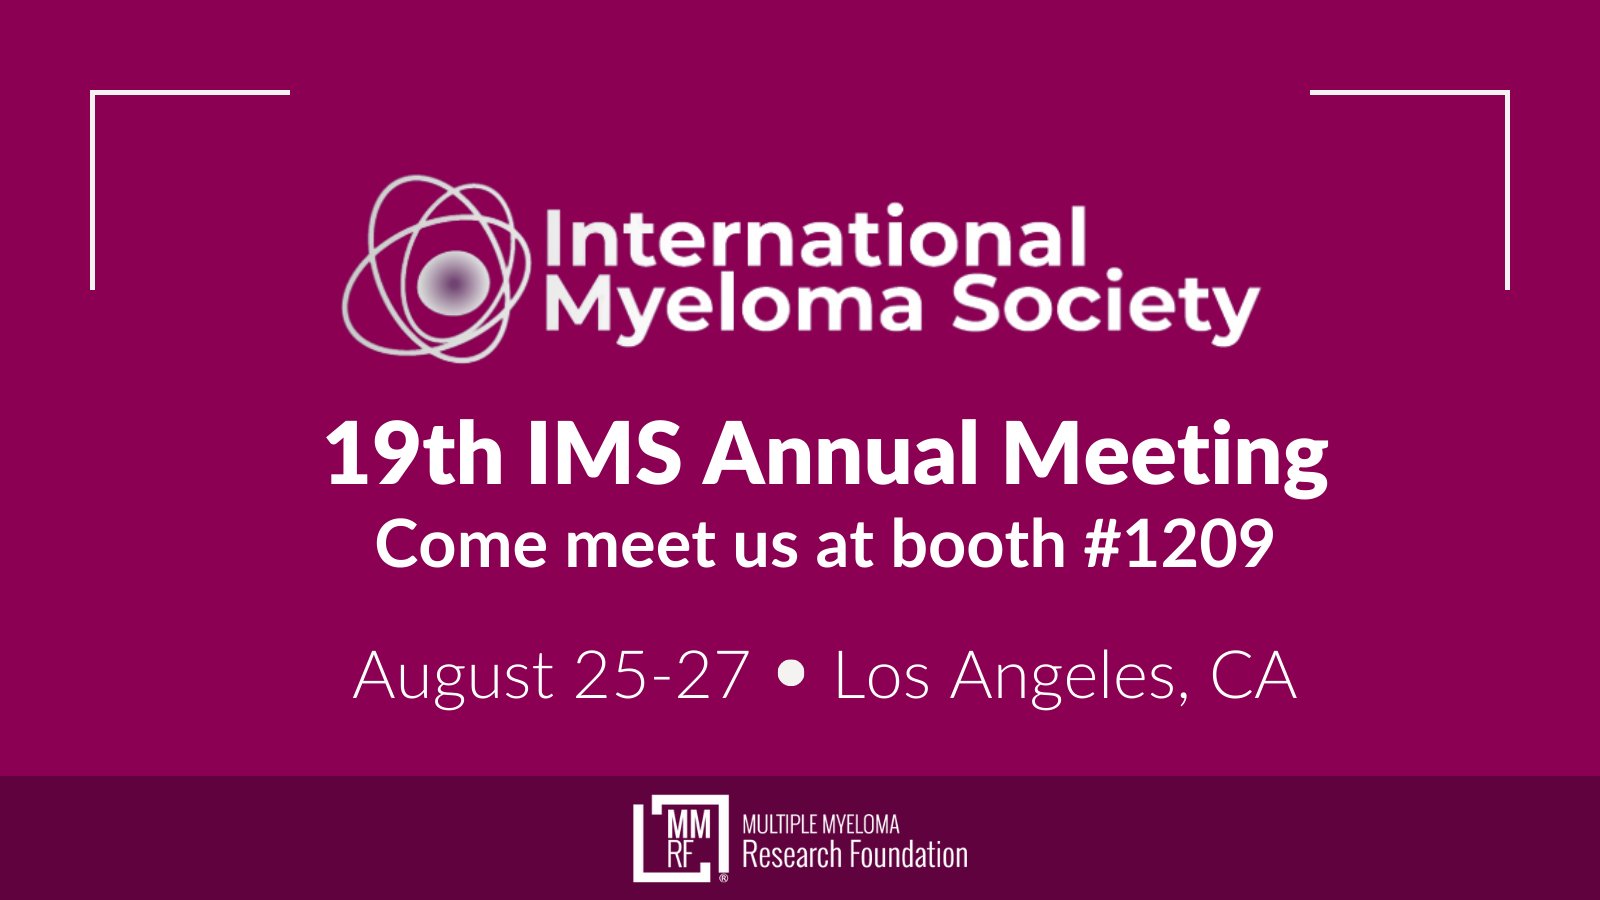 Multiple Myeloma RF on Twitter "The IMS Annual Meeting is the defining